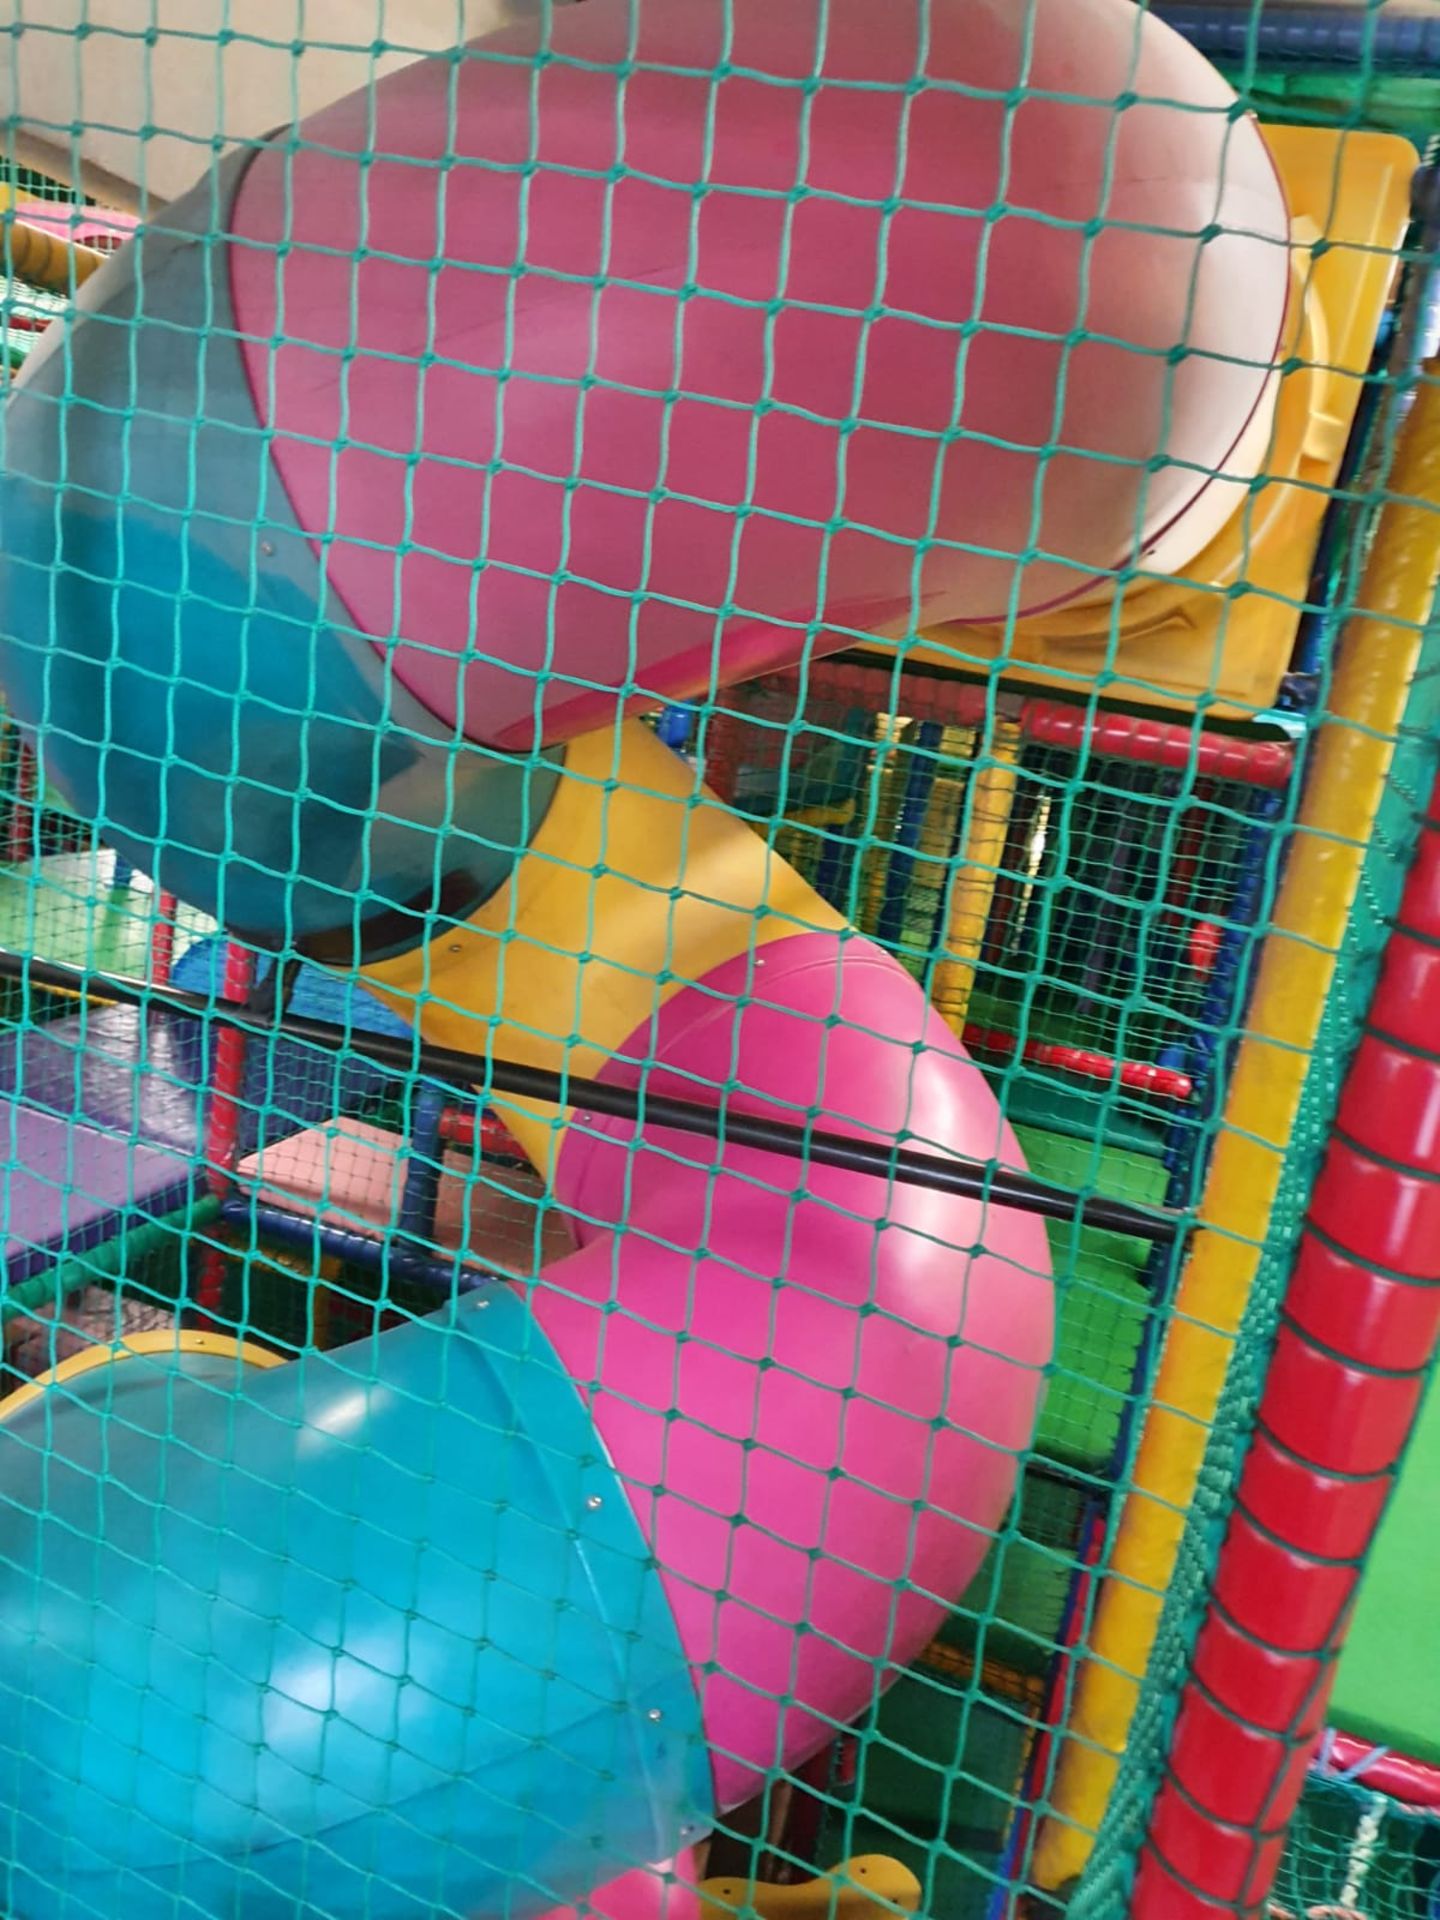 Bramleys Big Adventure Playground - Giant Action-Packed Playcentre With Slides, Zip Line Swings, - Image 122 of 128